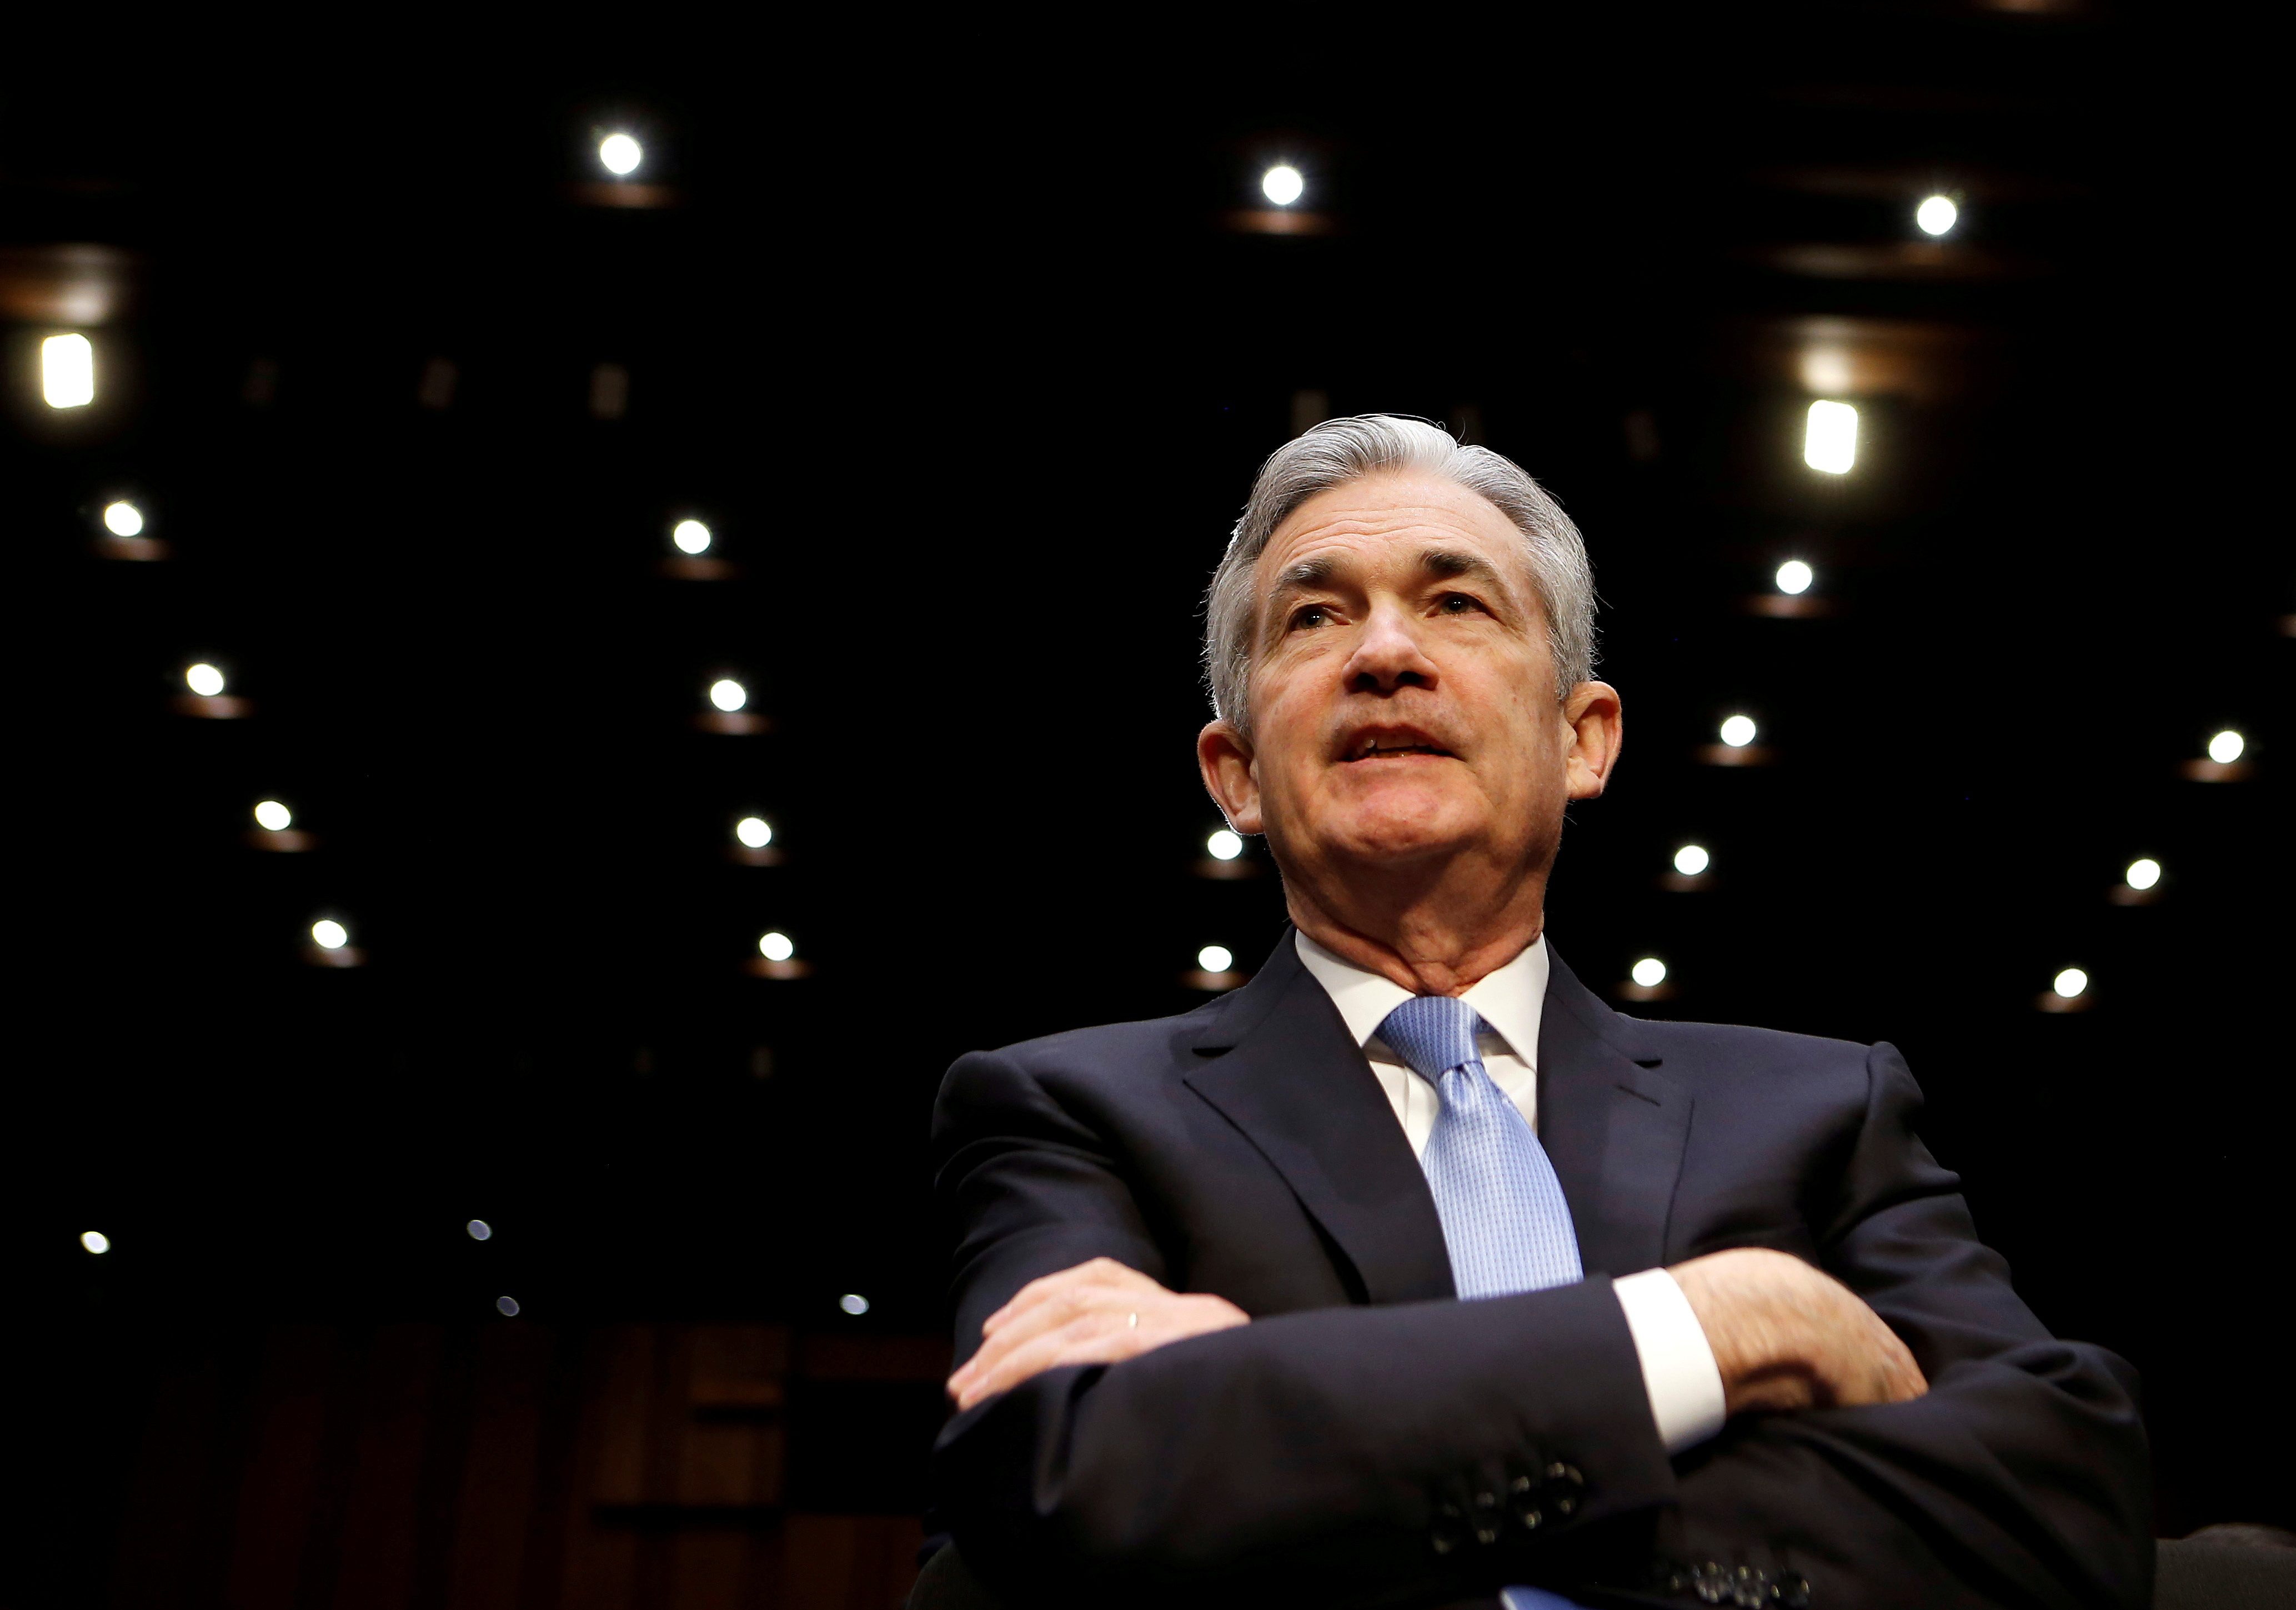 Powell’s rollercoaster ride at the Fed: From ‘enemy’ to economic savior